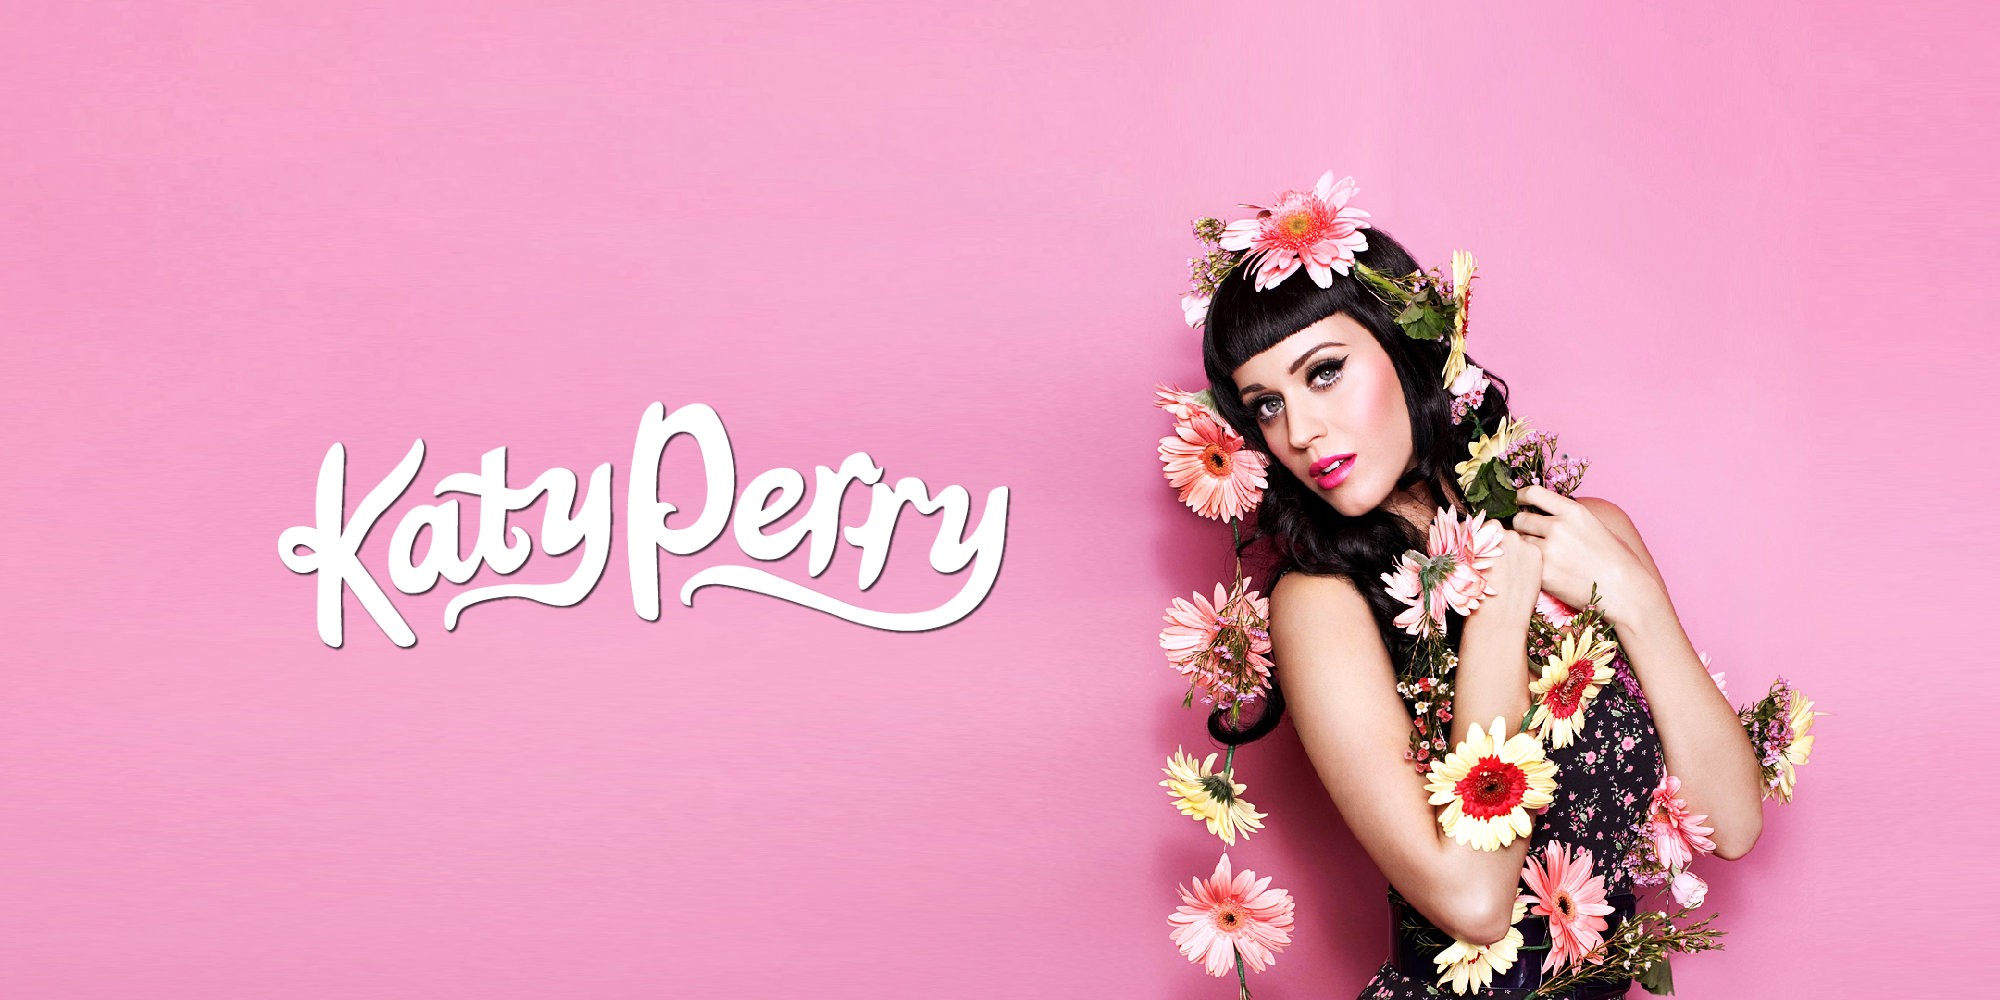 Katy Perry Albums